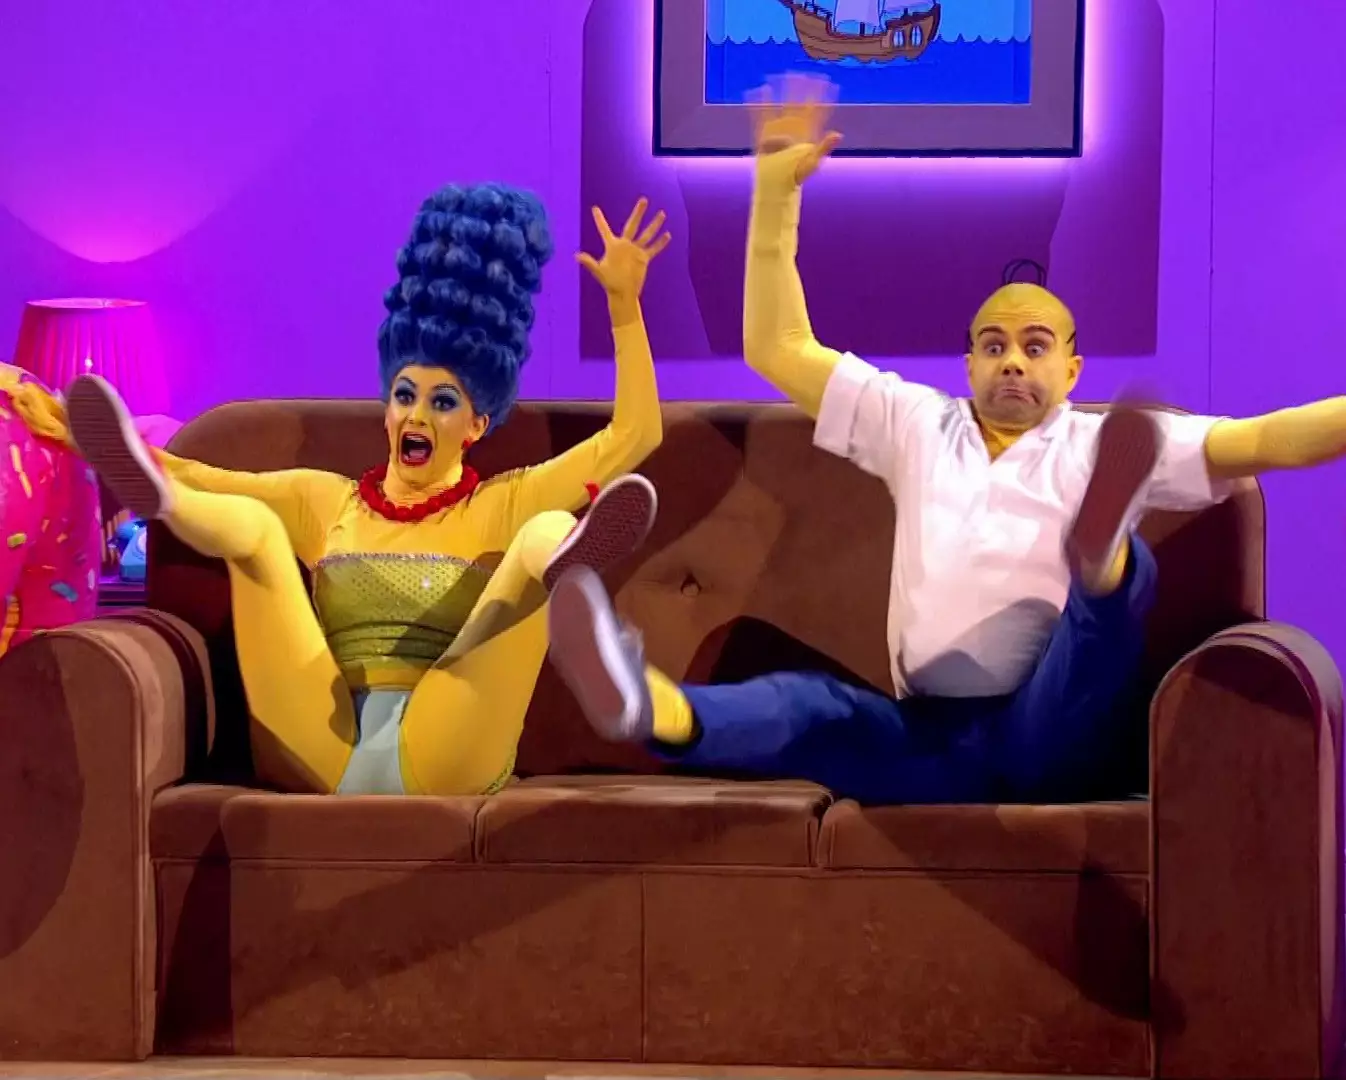 Fans called the Simpsons-inspired routine 'disturbing' and 'surreal' (